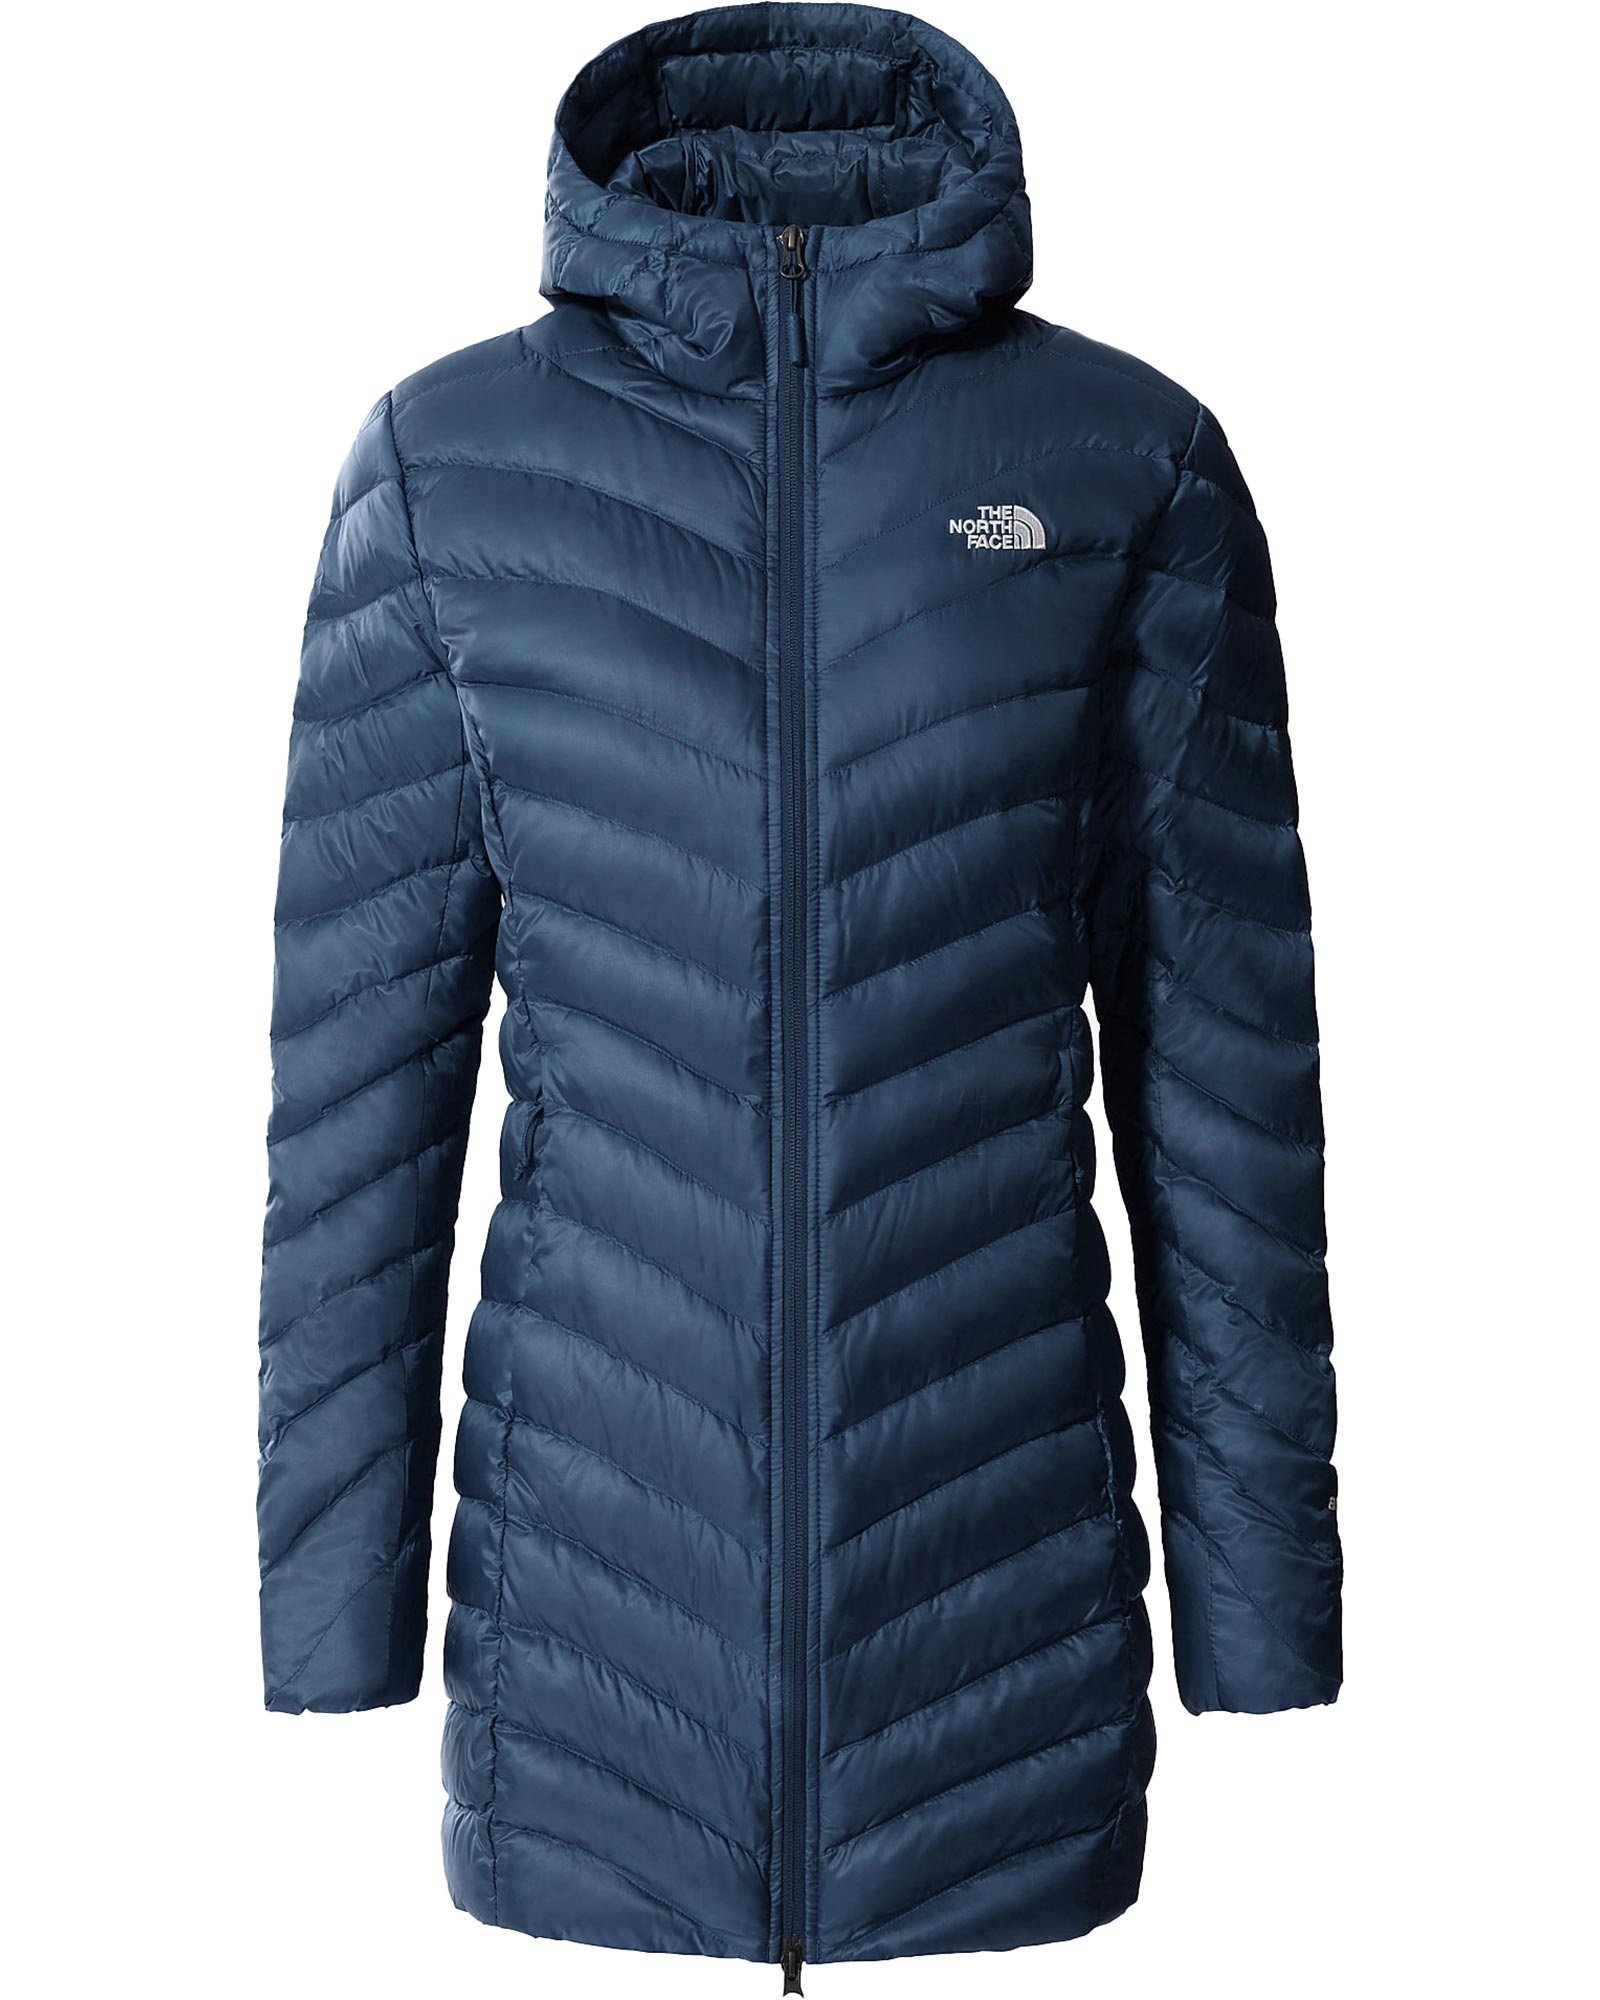 The North Face Trevail Women’s Parka Jacket - Monterey Blue XS